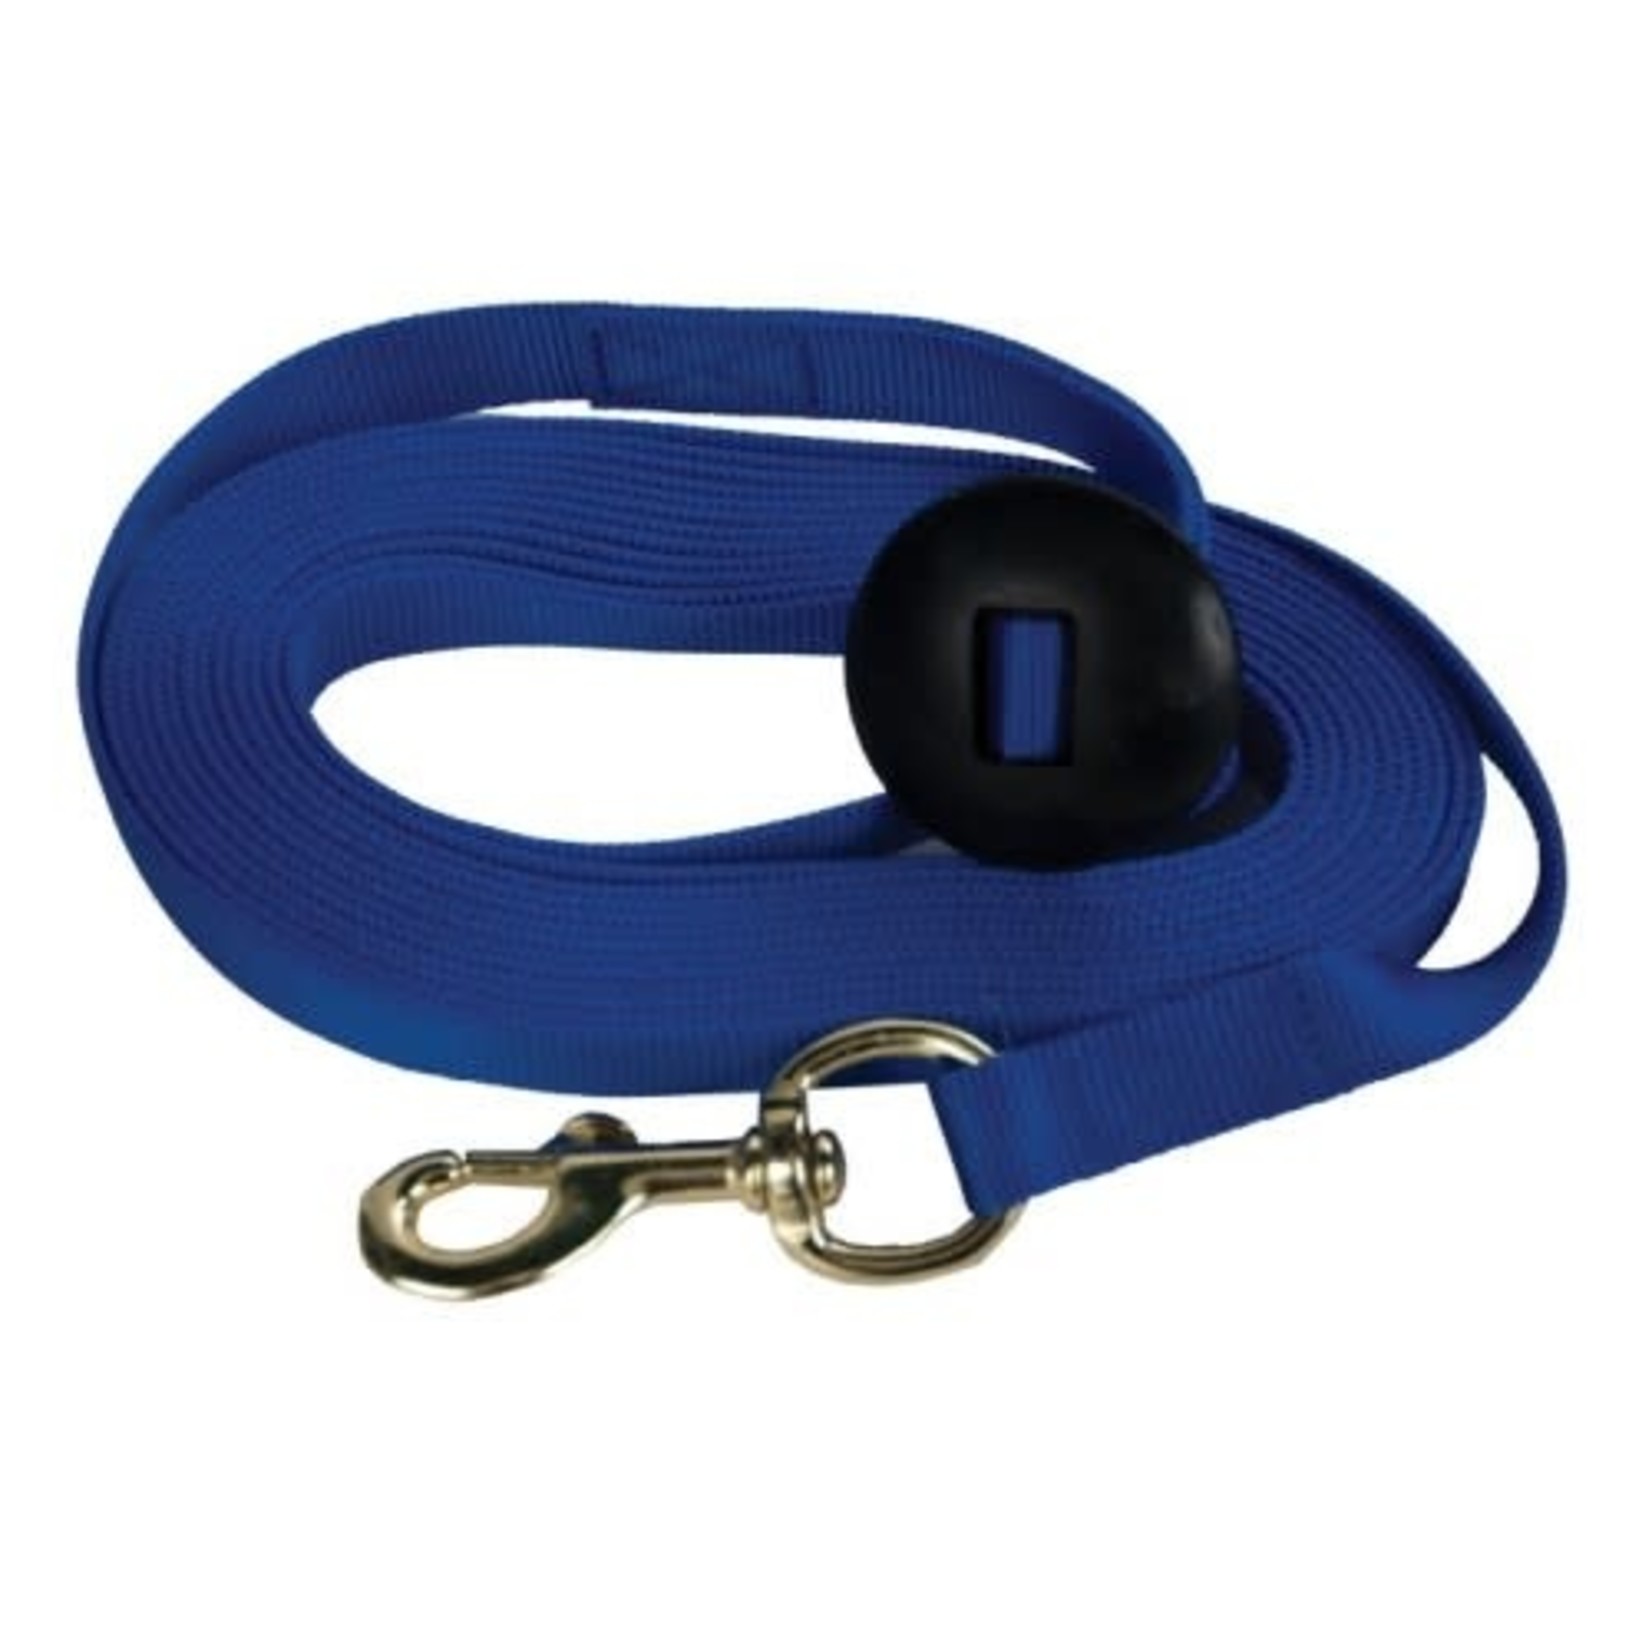 Western Rawhide Nylon Lunge Line with Stopper